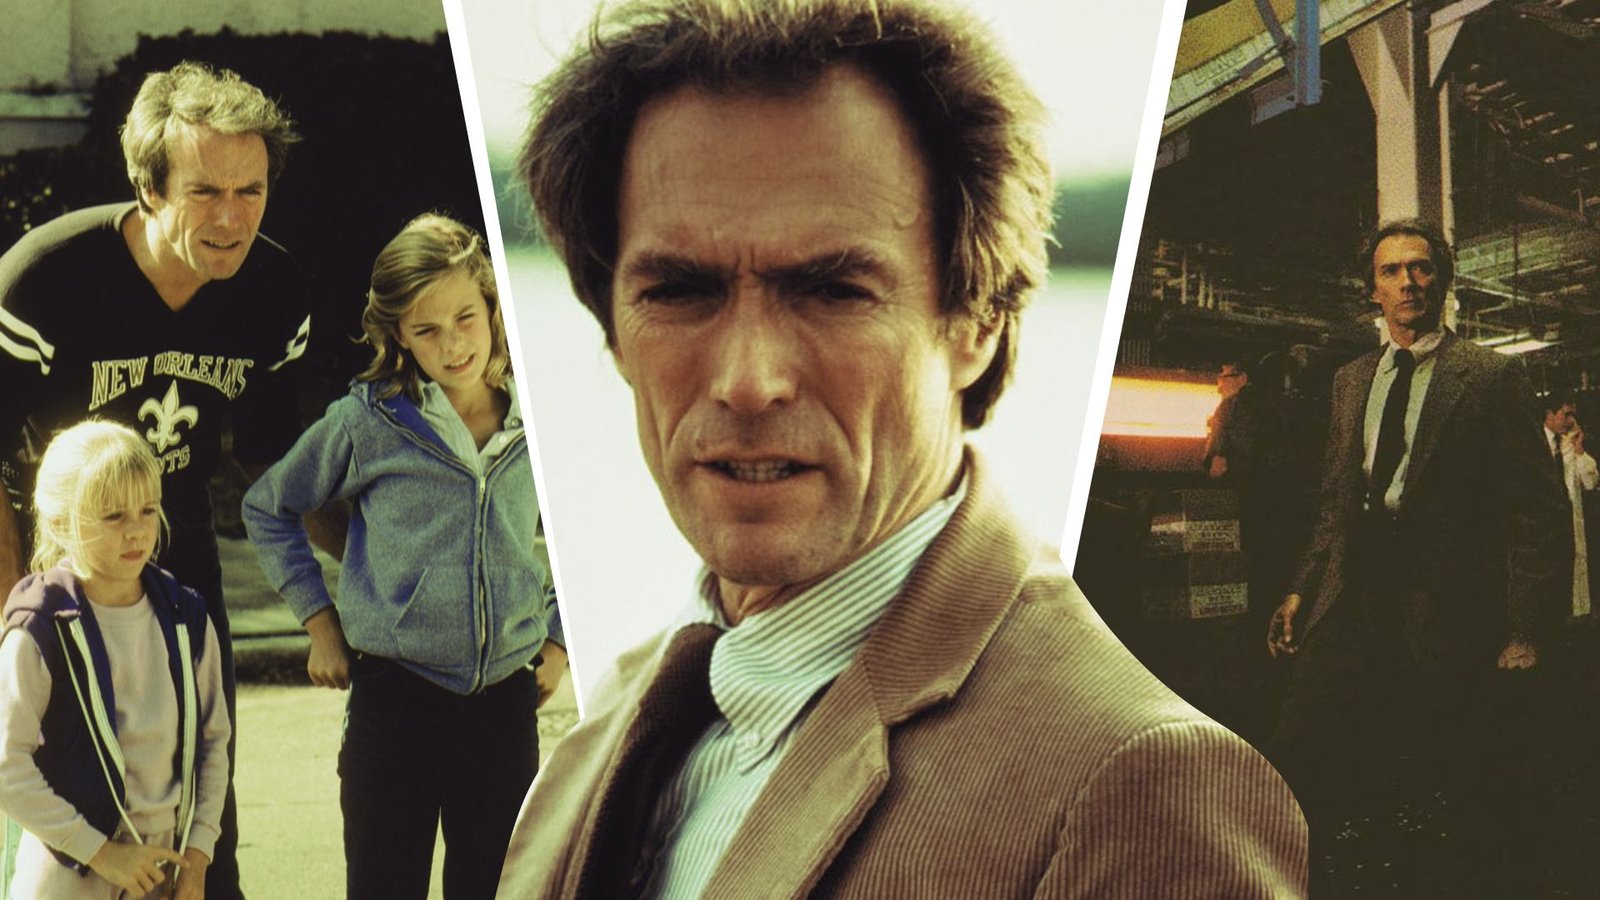 This 1984 Thriller Is an Underrated Clint Eastwood Masterpiece